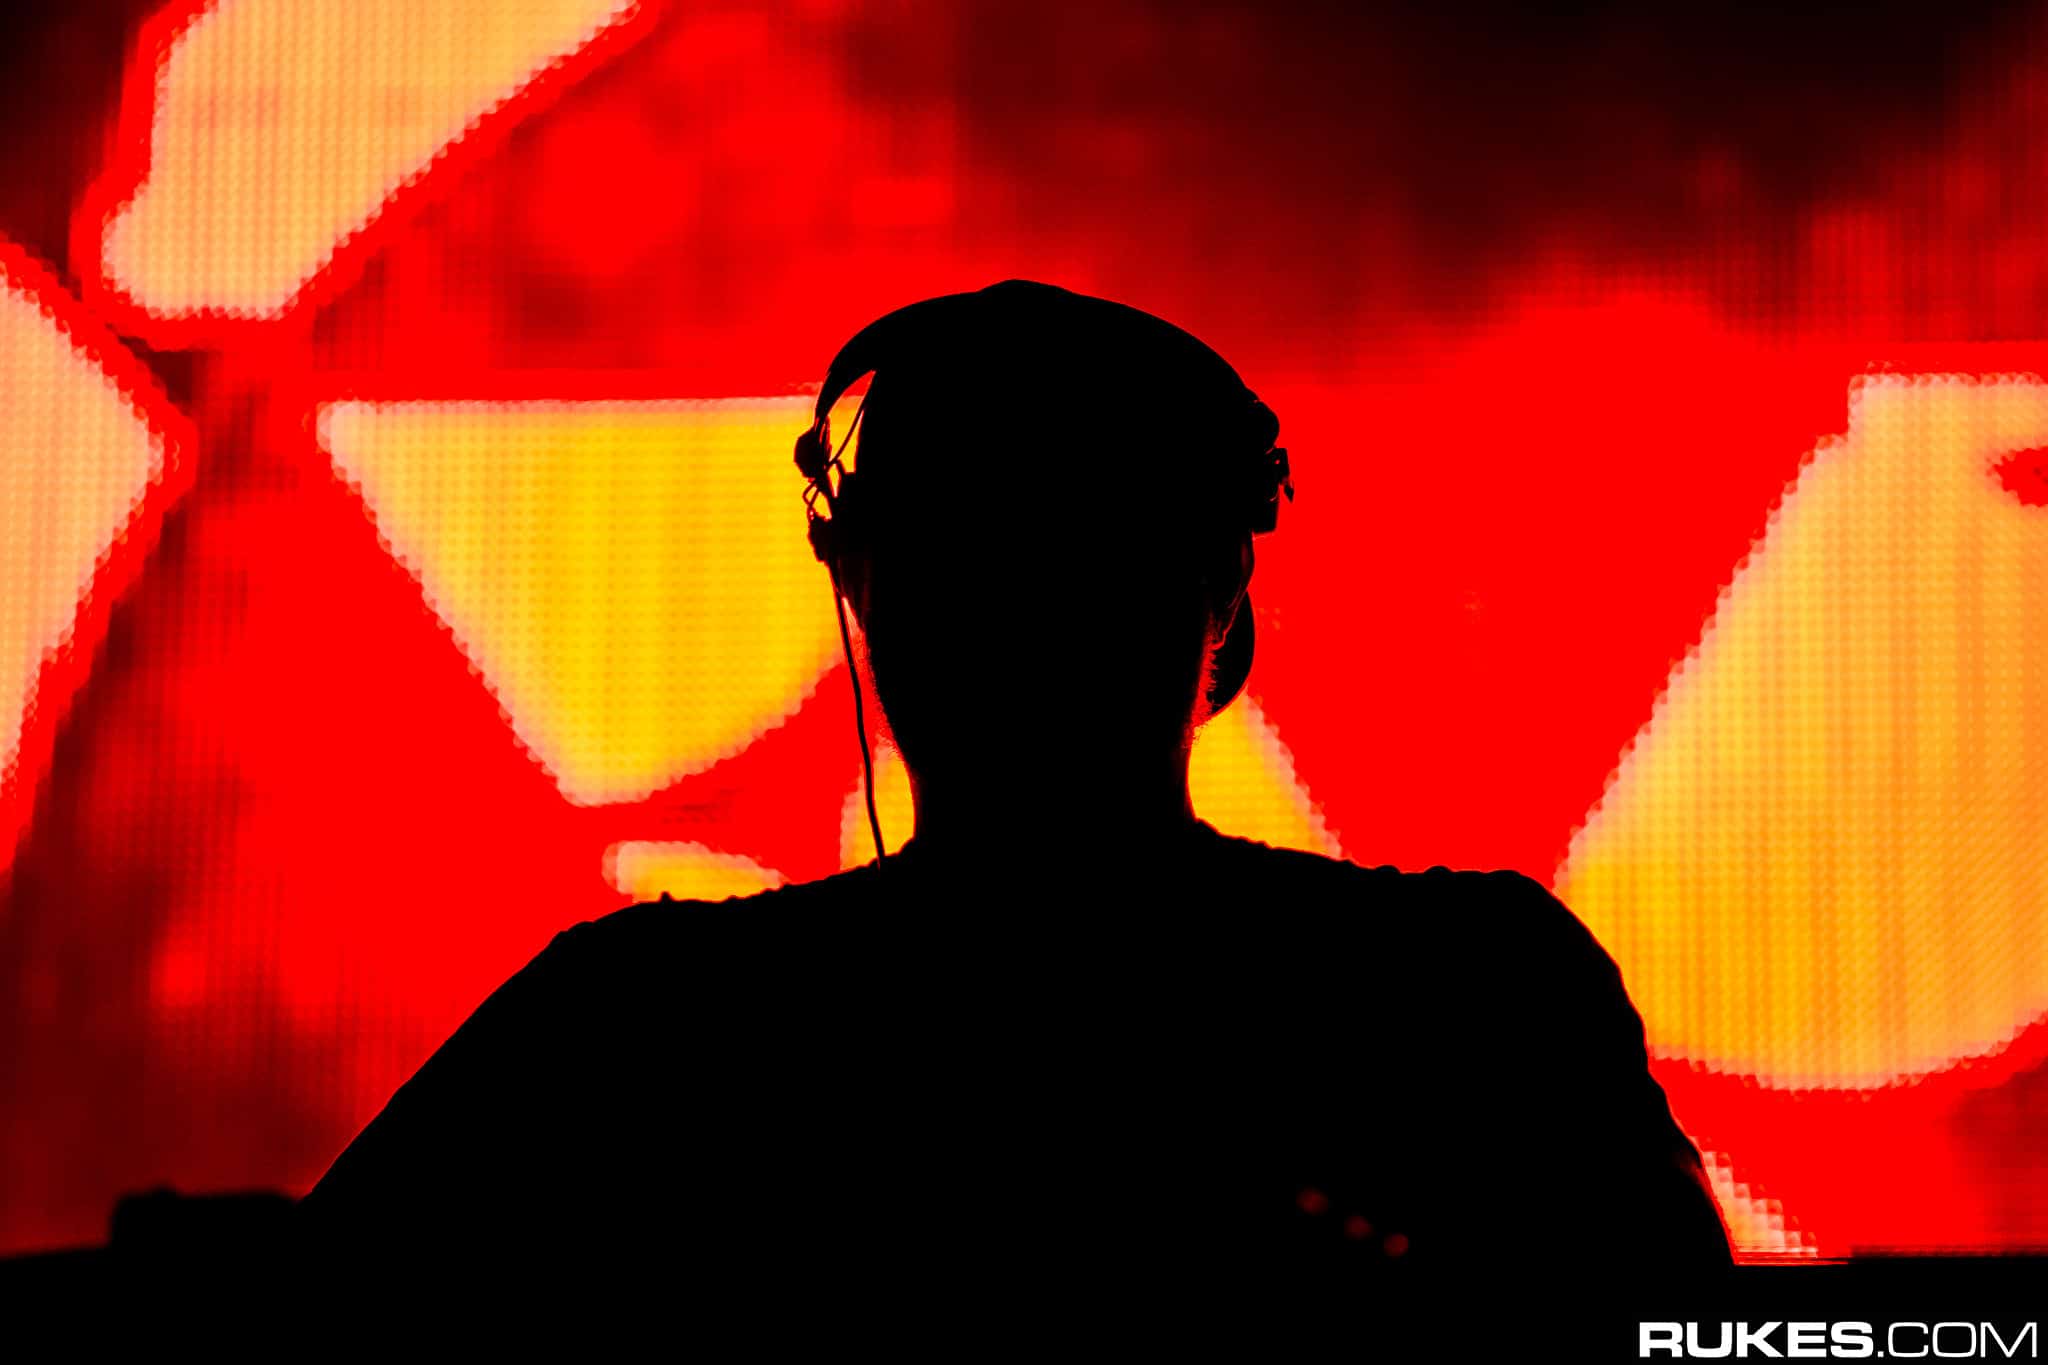 Eric Prydz drops new release ‘You’ from his protégé Charles D on his own label